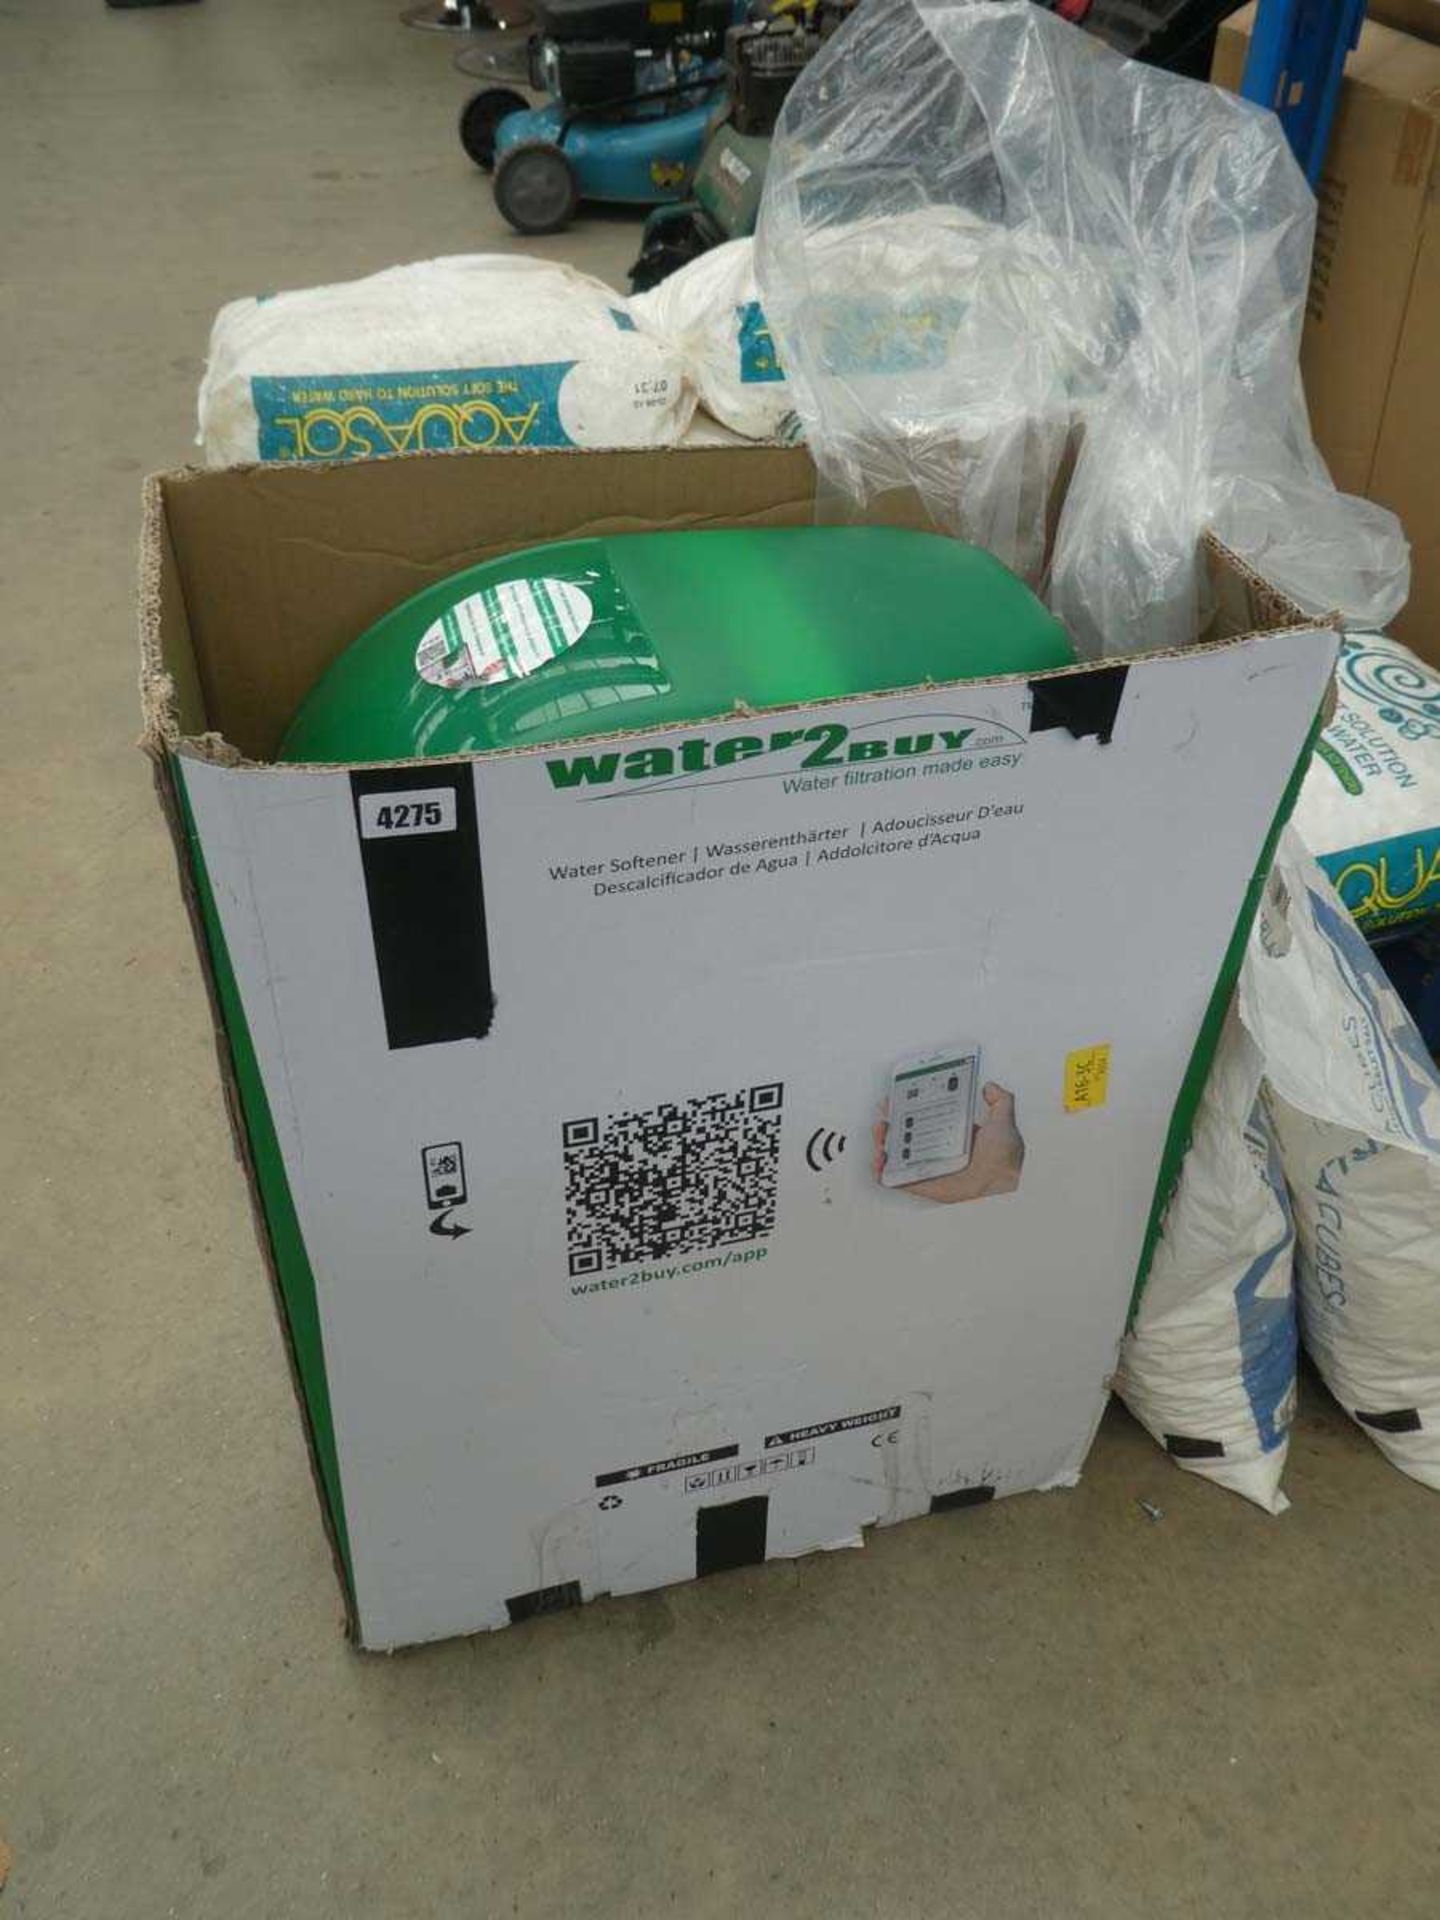 Boxed wifi connectable water softener with 3 bags of water softener tablets - Image 2 of 2